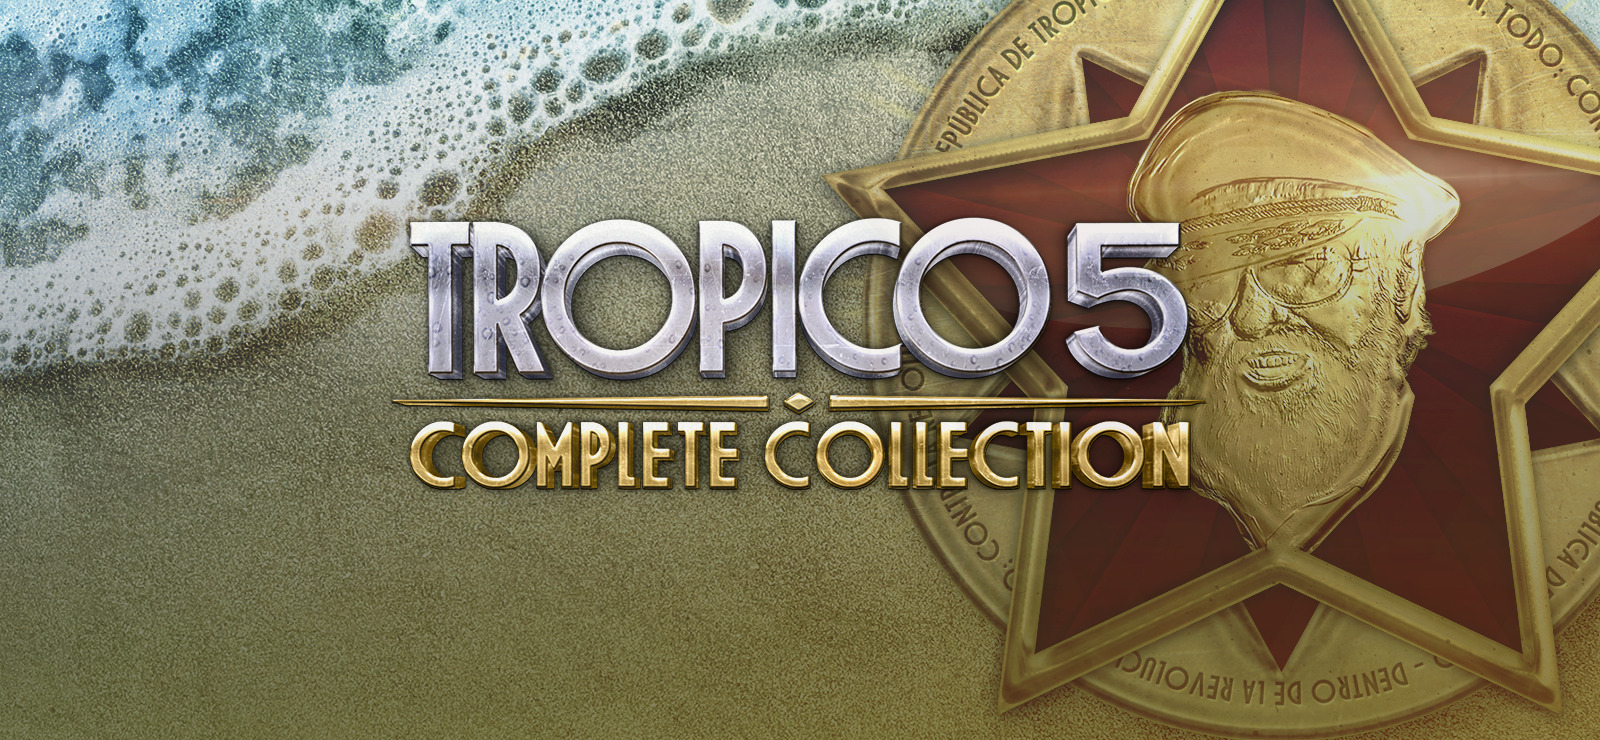 40% Tropico 5: Complete Collection On GOG.Com